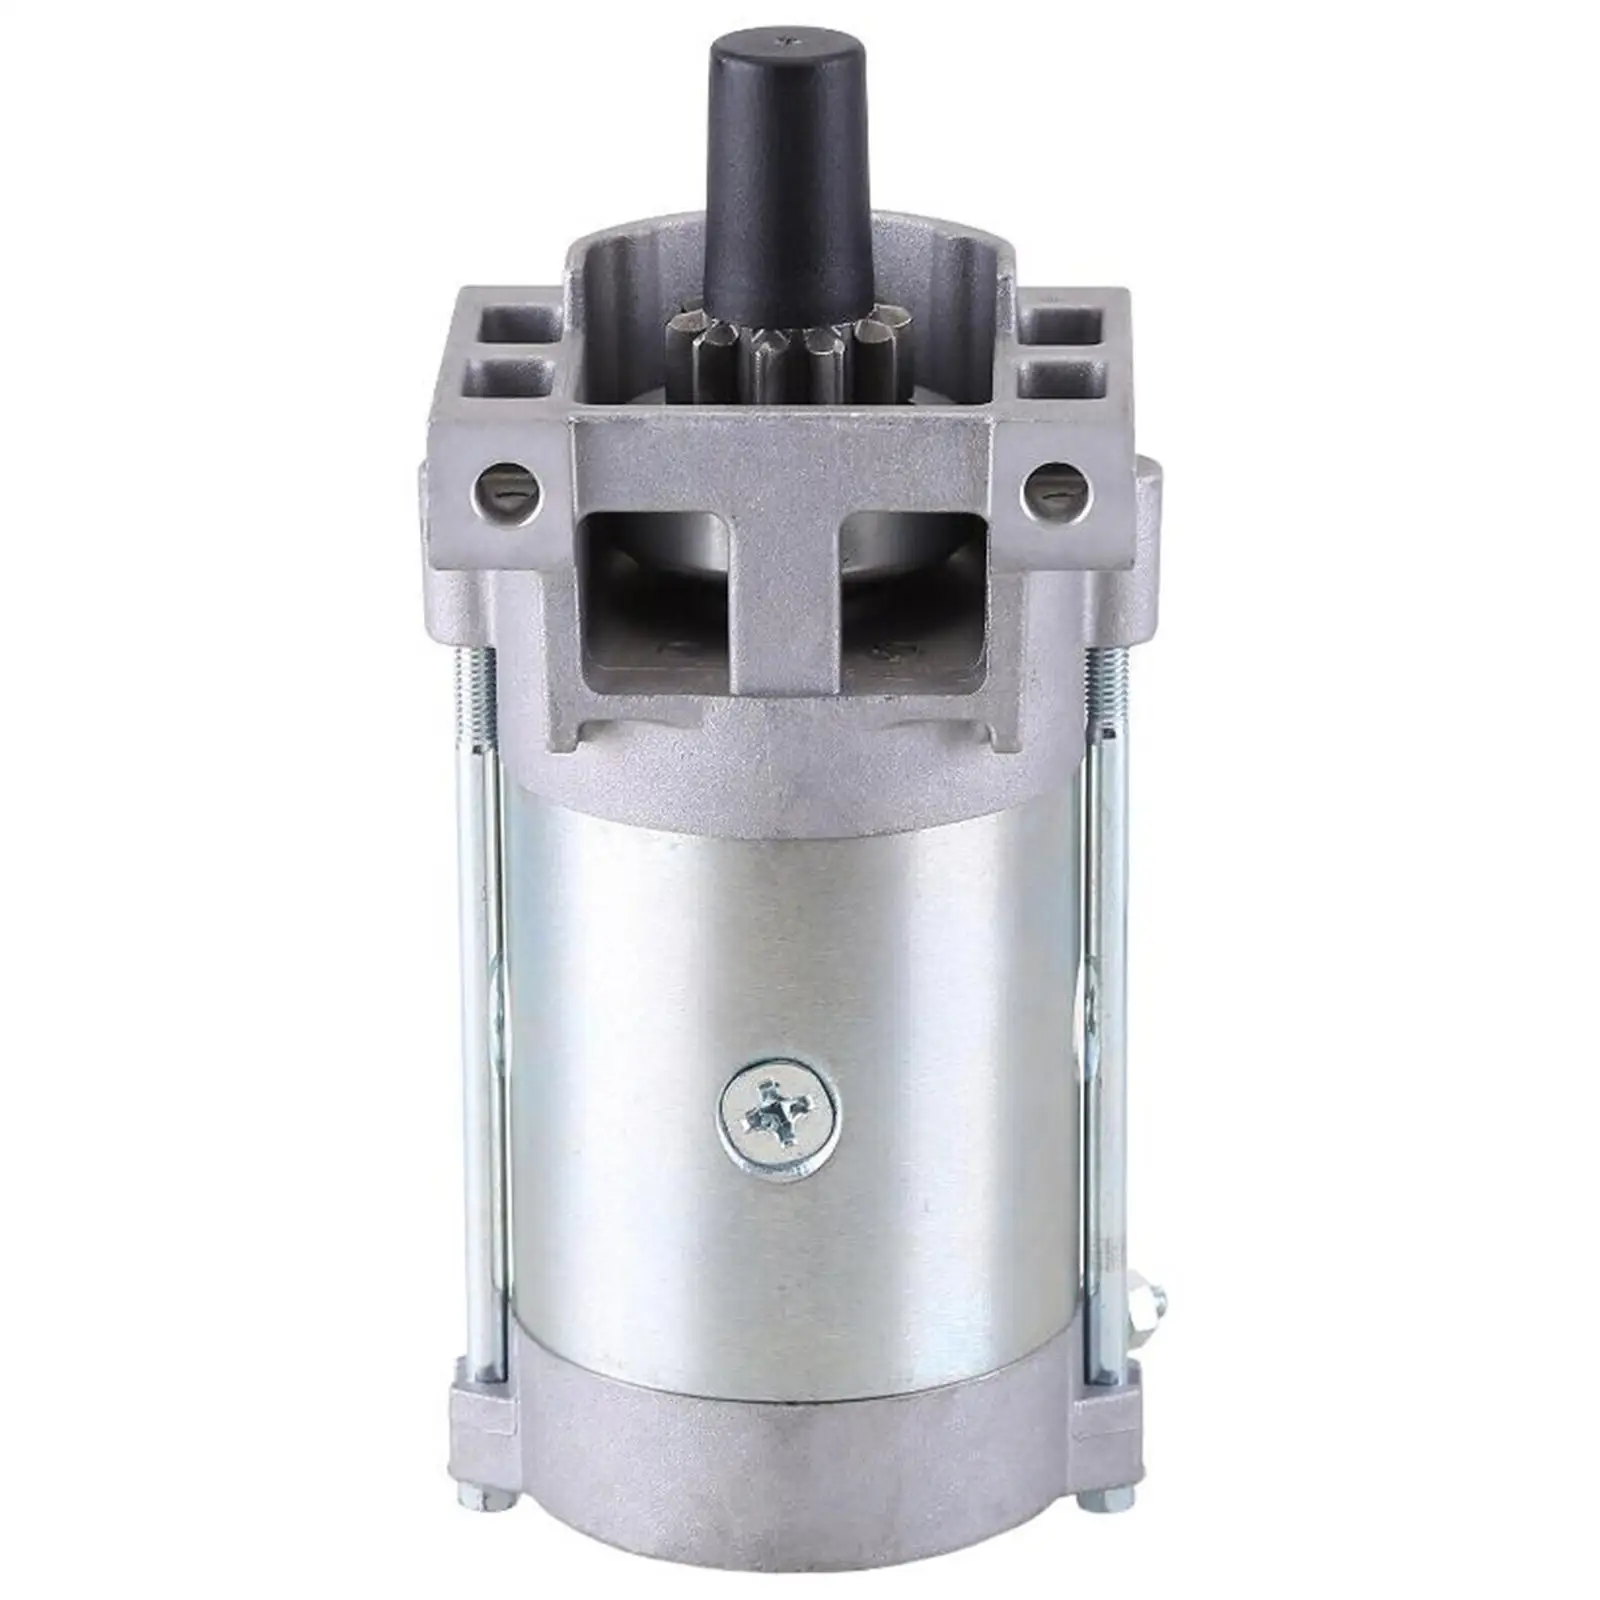 Starter Motor Replaces Easy to Install High Performance Professional Motors Starter Parts 270360054-0001 2703600540001 21110533